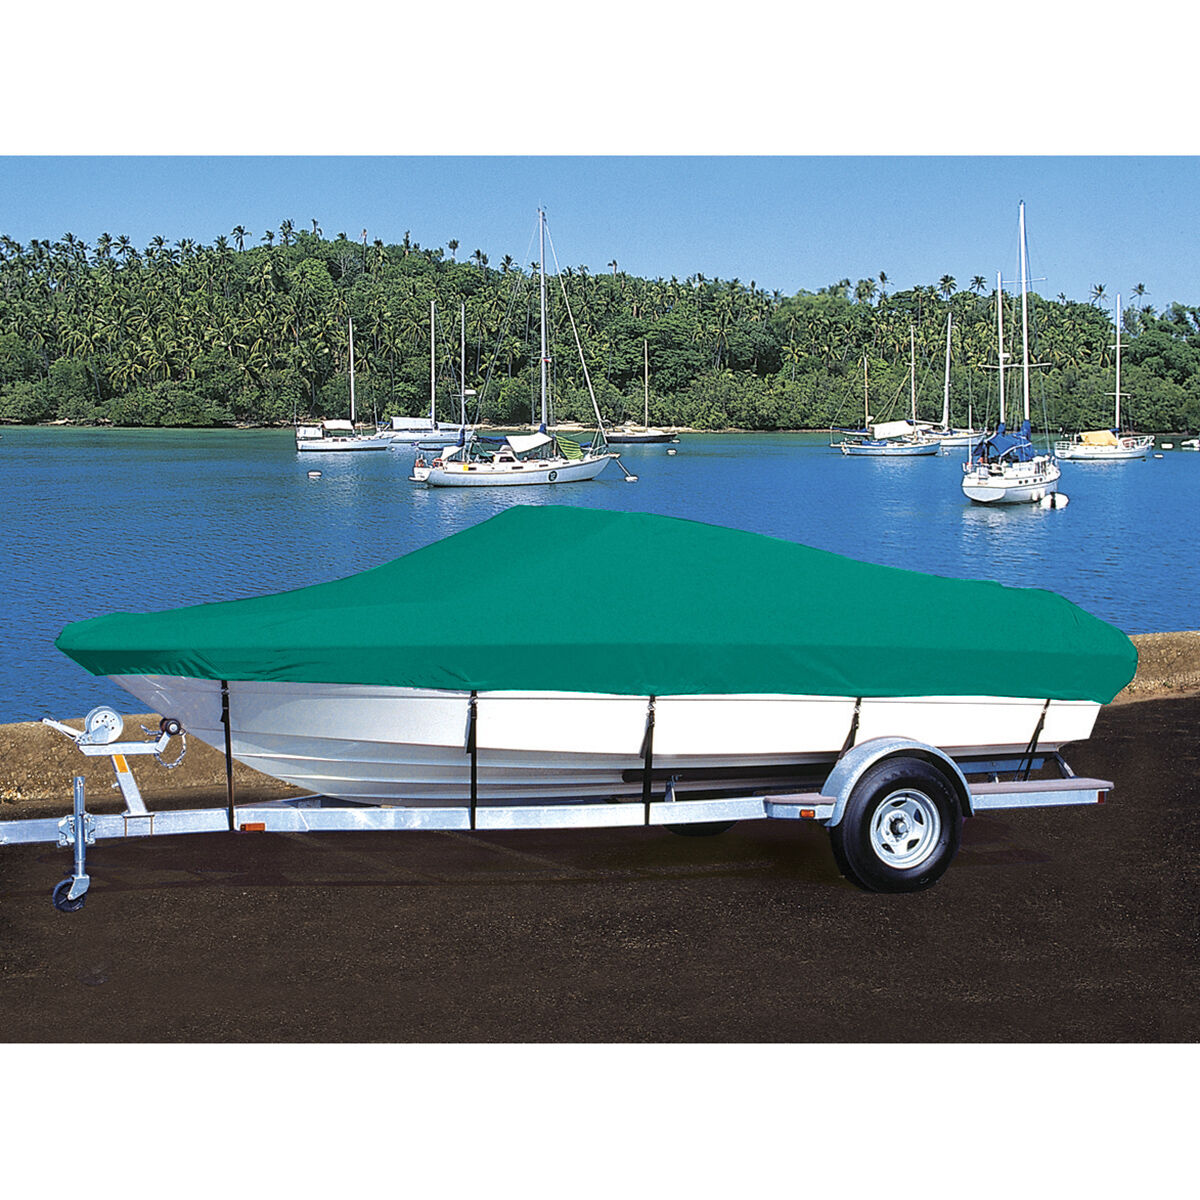 Taylor Made Trailerite Hot Shot Cover for 06 Hewescrft 20 Pro V OB Boat Cover in Teal Polyester